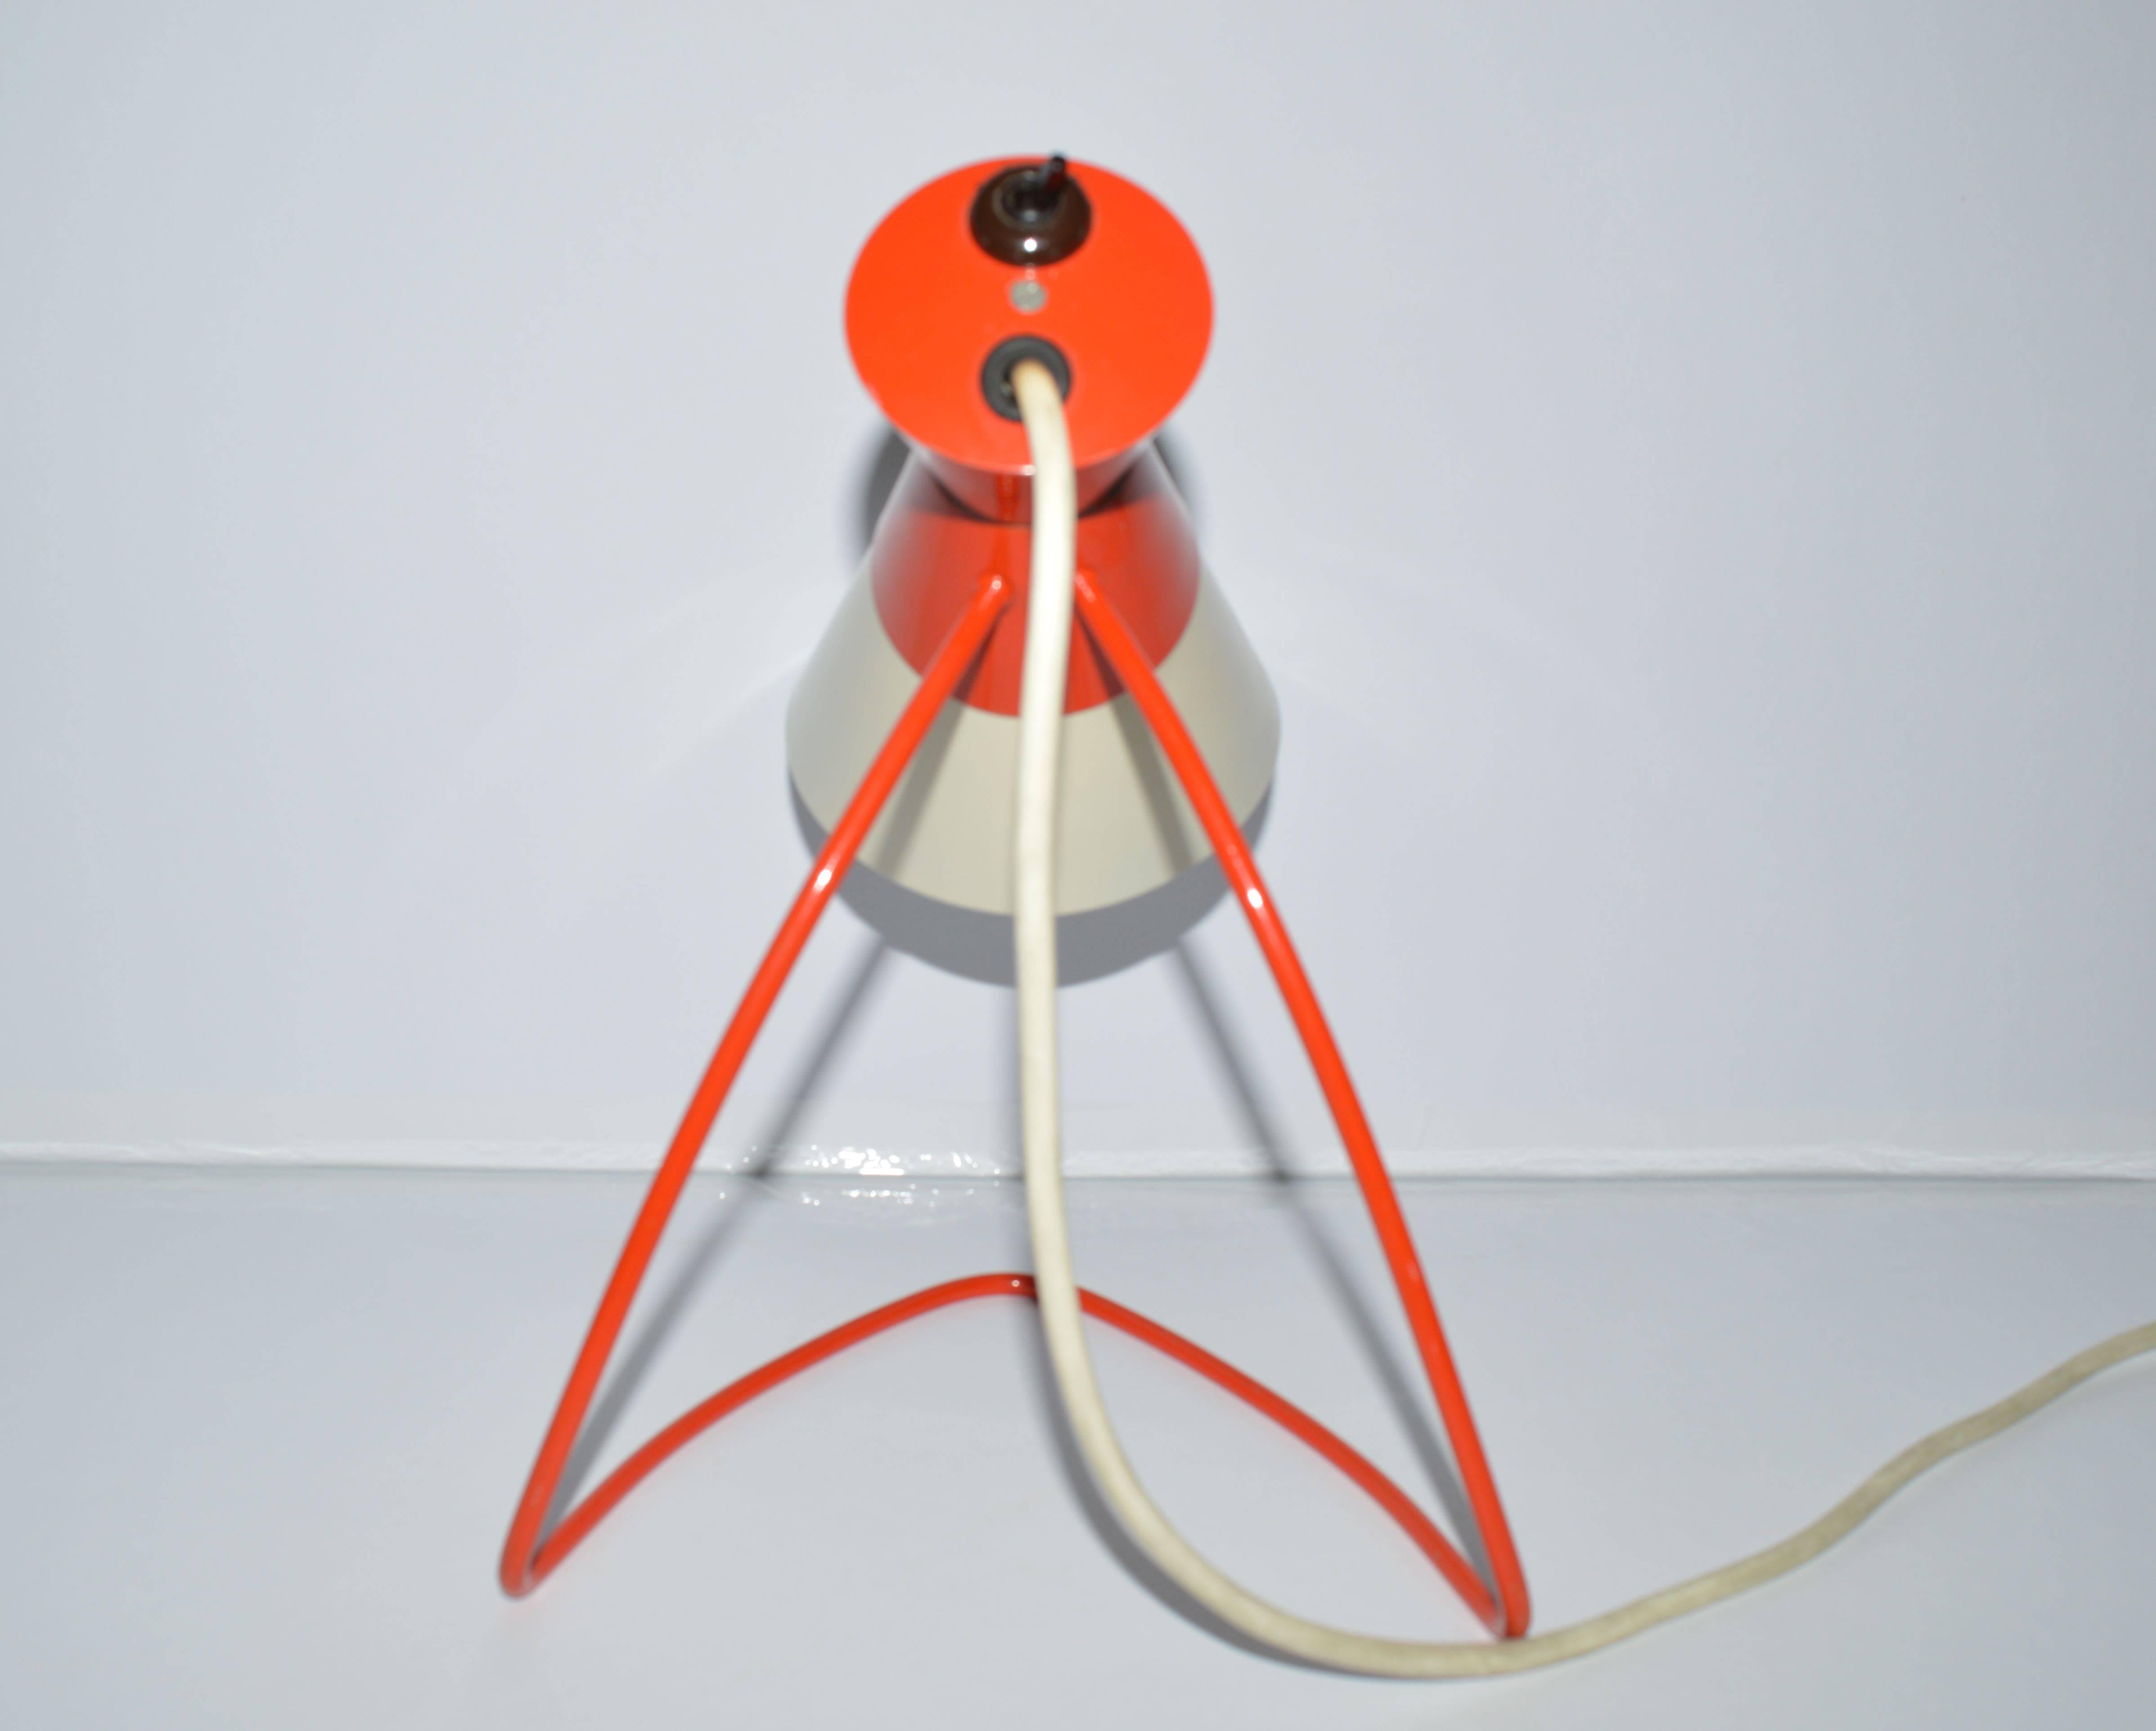 Czech Napako Mid-Century Red and White Table Lamp, Josef Hurka, 1950s For Sale